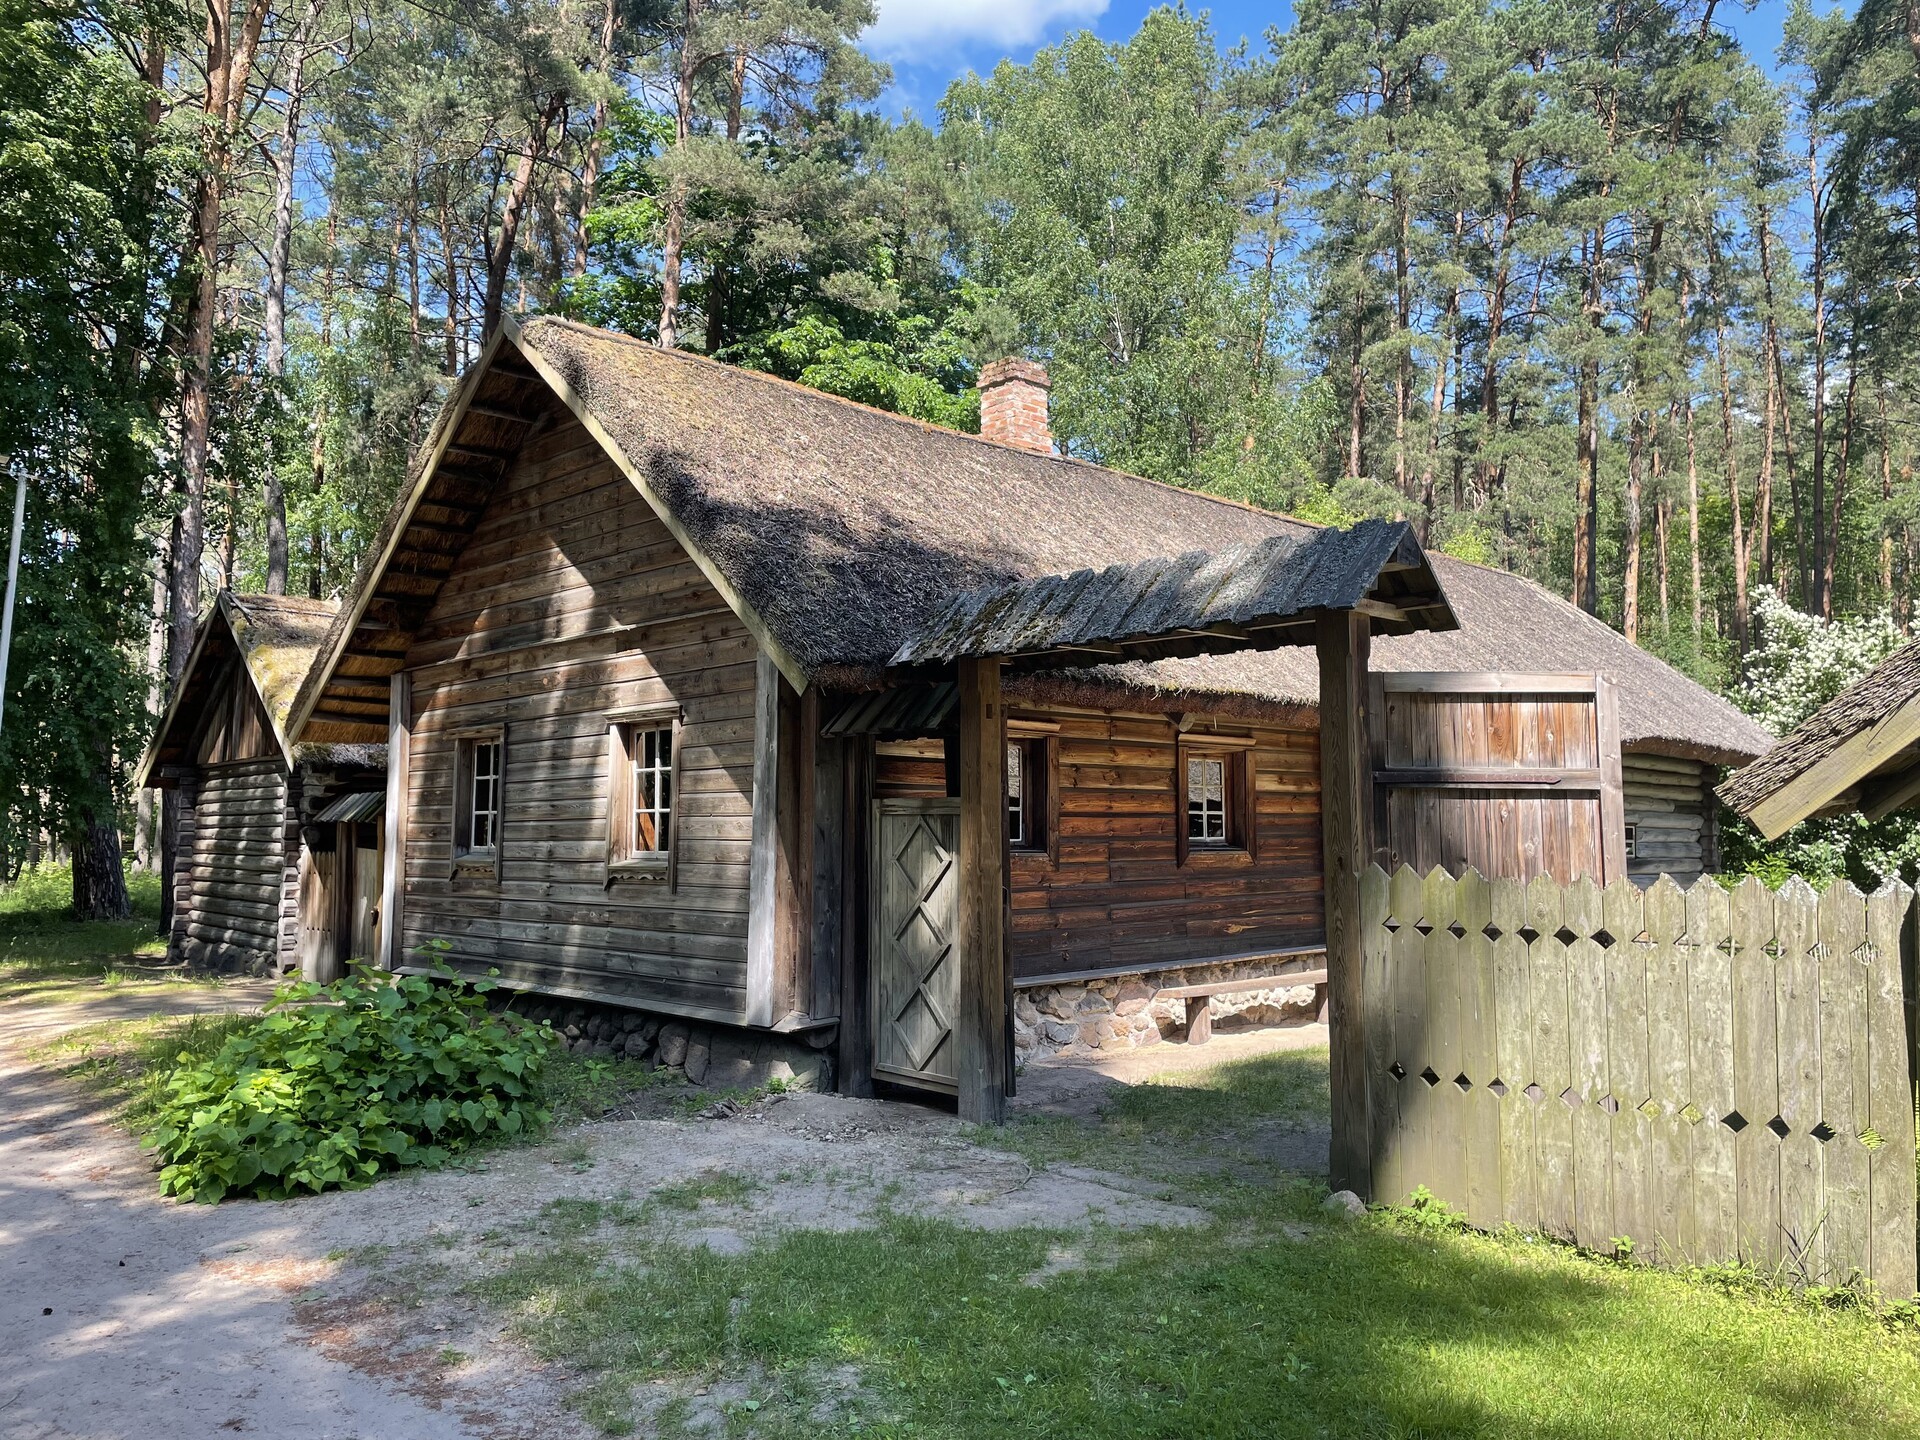 A wooden building with a thatched roof, at the Ethnographic Open-air Museum in Jugla, Latvia